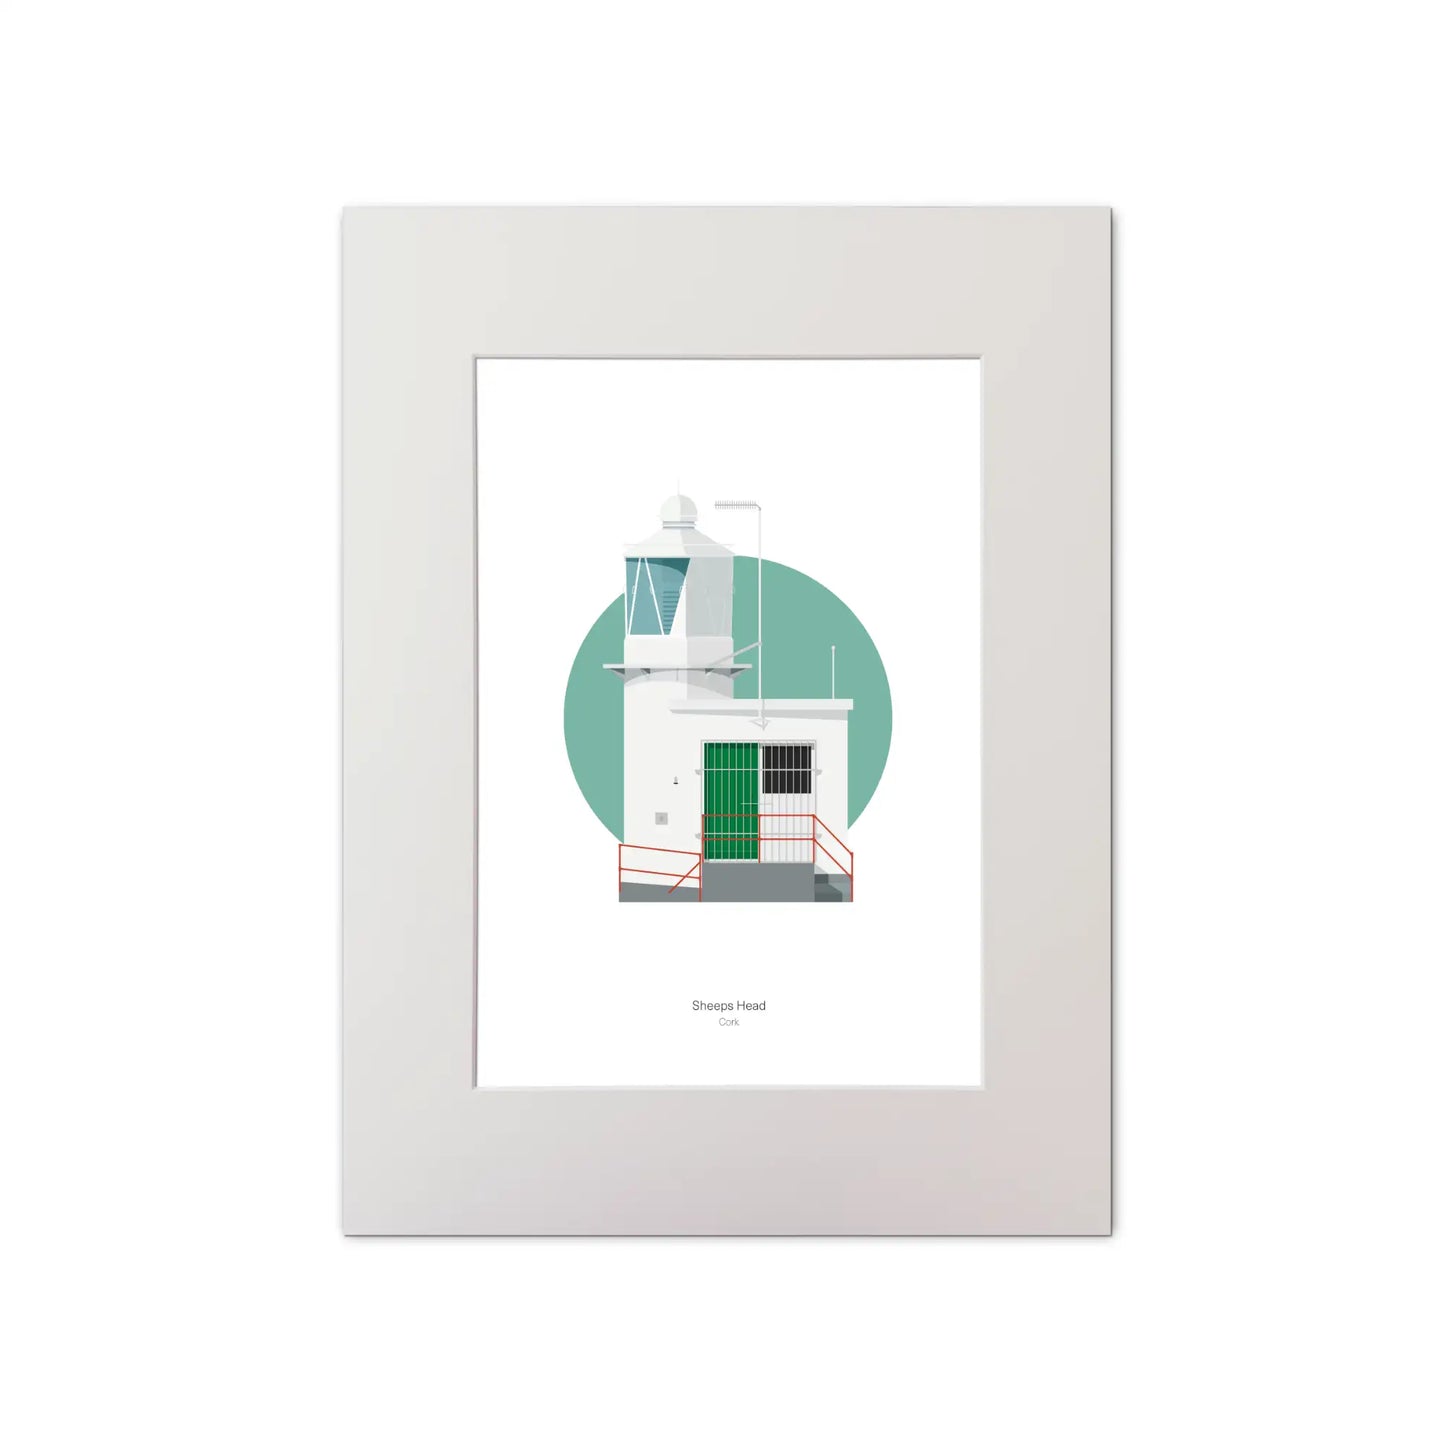 Contemporary graphic illustration of Sheeps Head lighthouse on a white background inside light blue square, mounted and measuring 30x40cm.